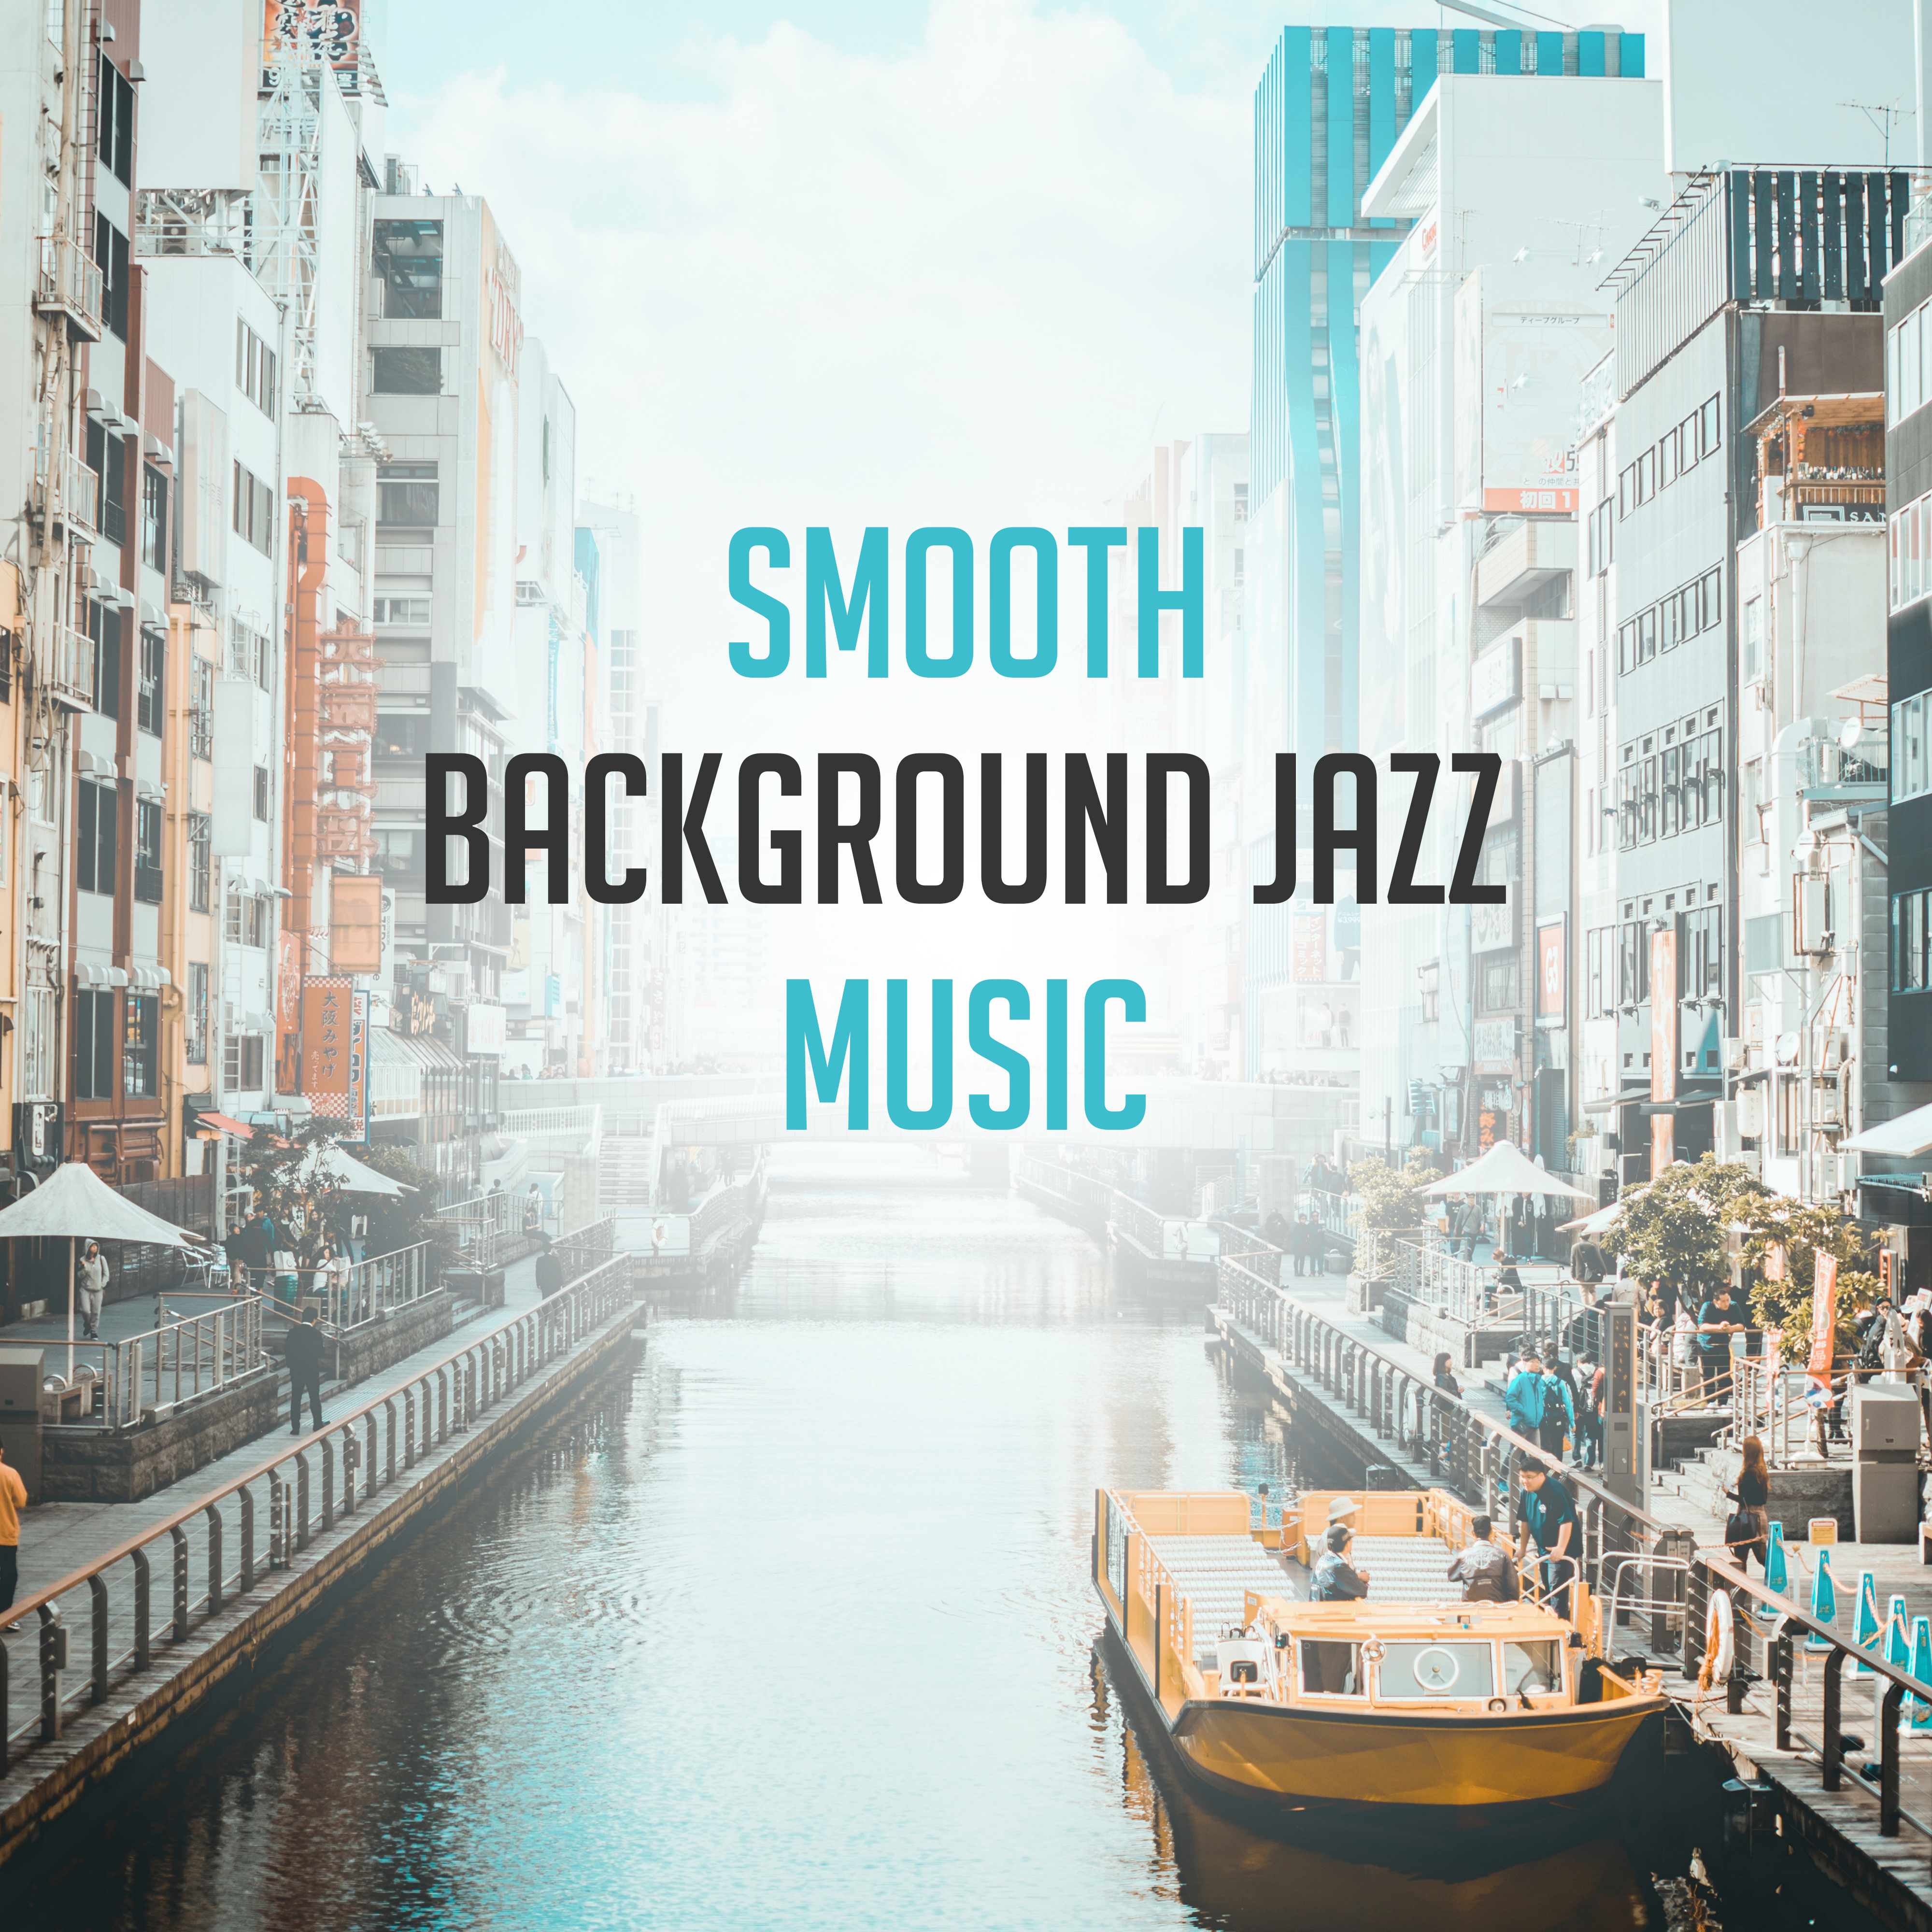 Smooth Background Jazz Music  Easy Listening Songs, Calm Down  Relax, Peaceful Note, Moonlight Jazz